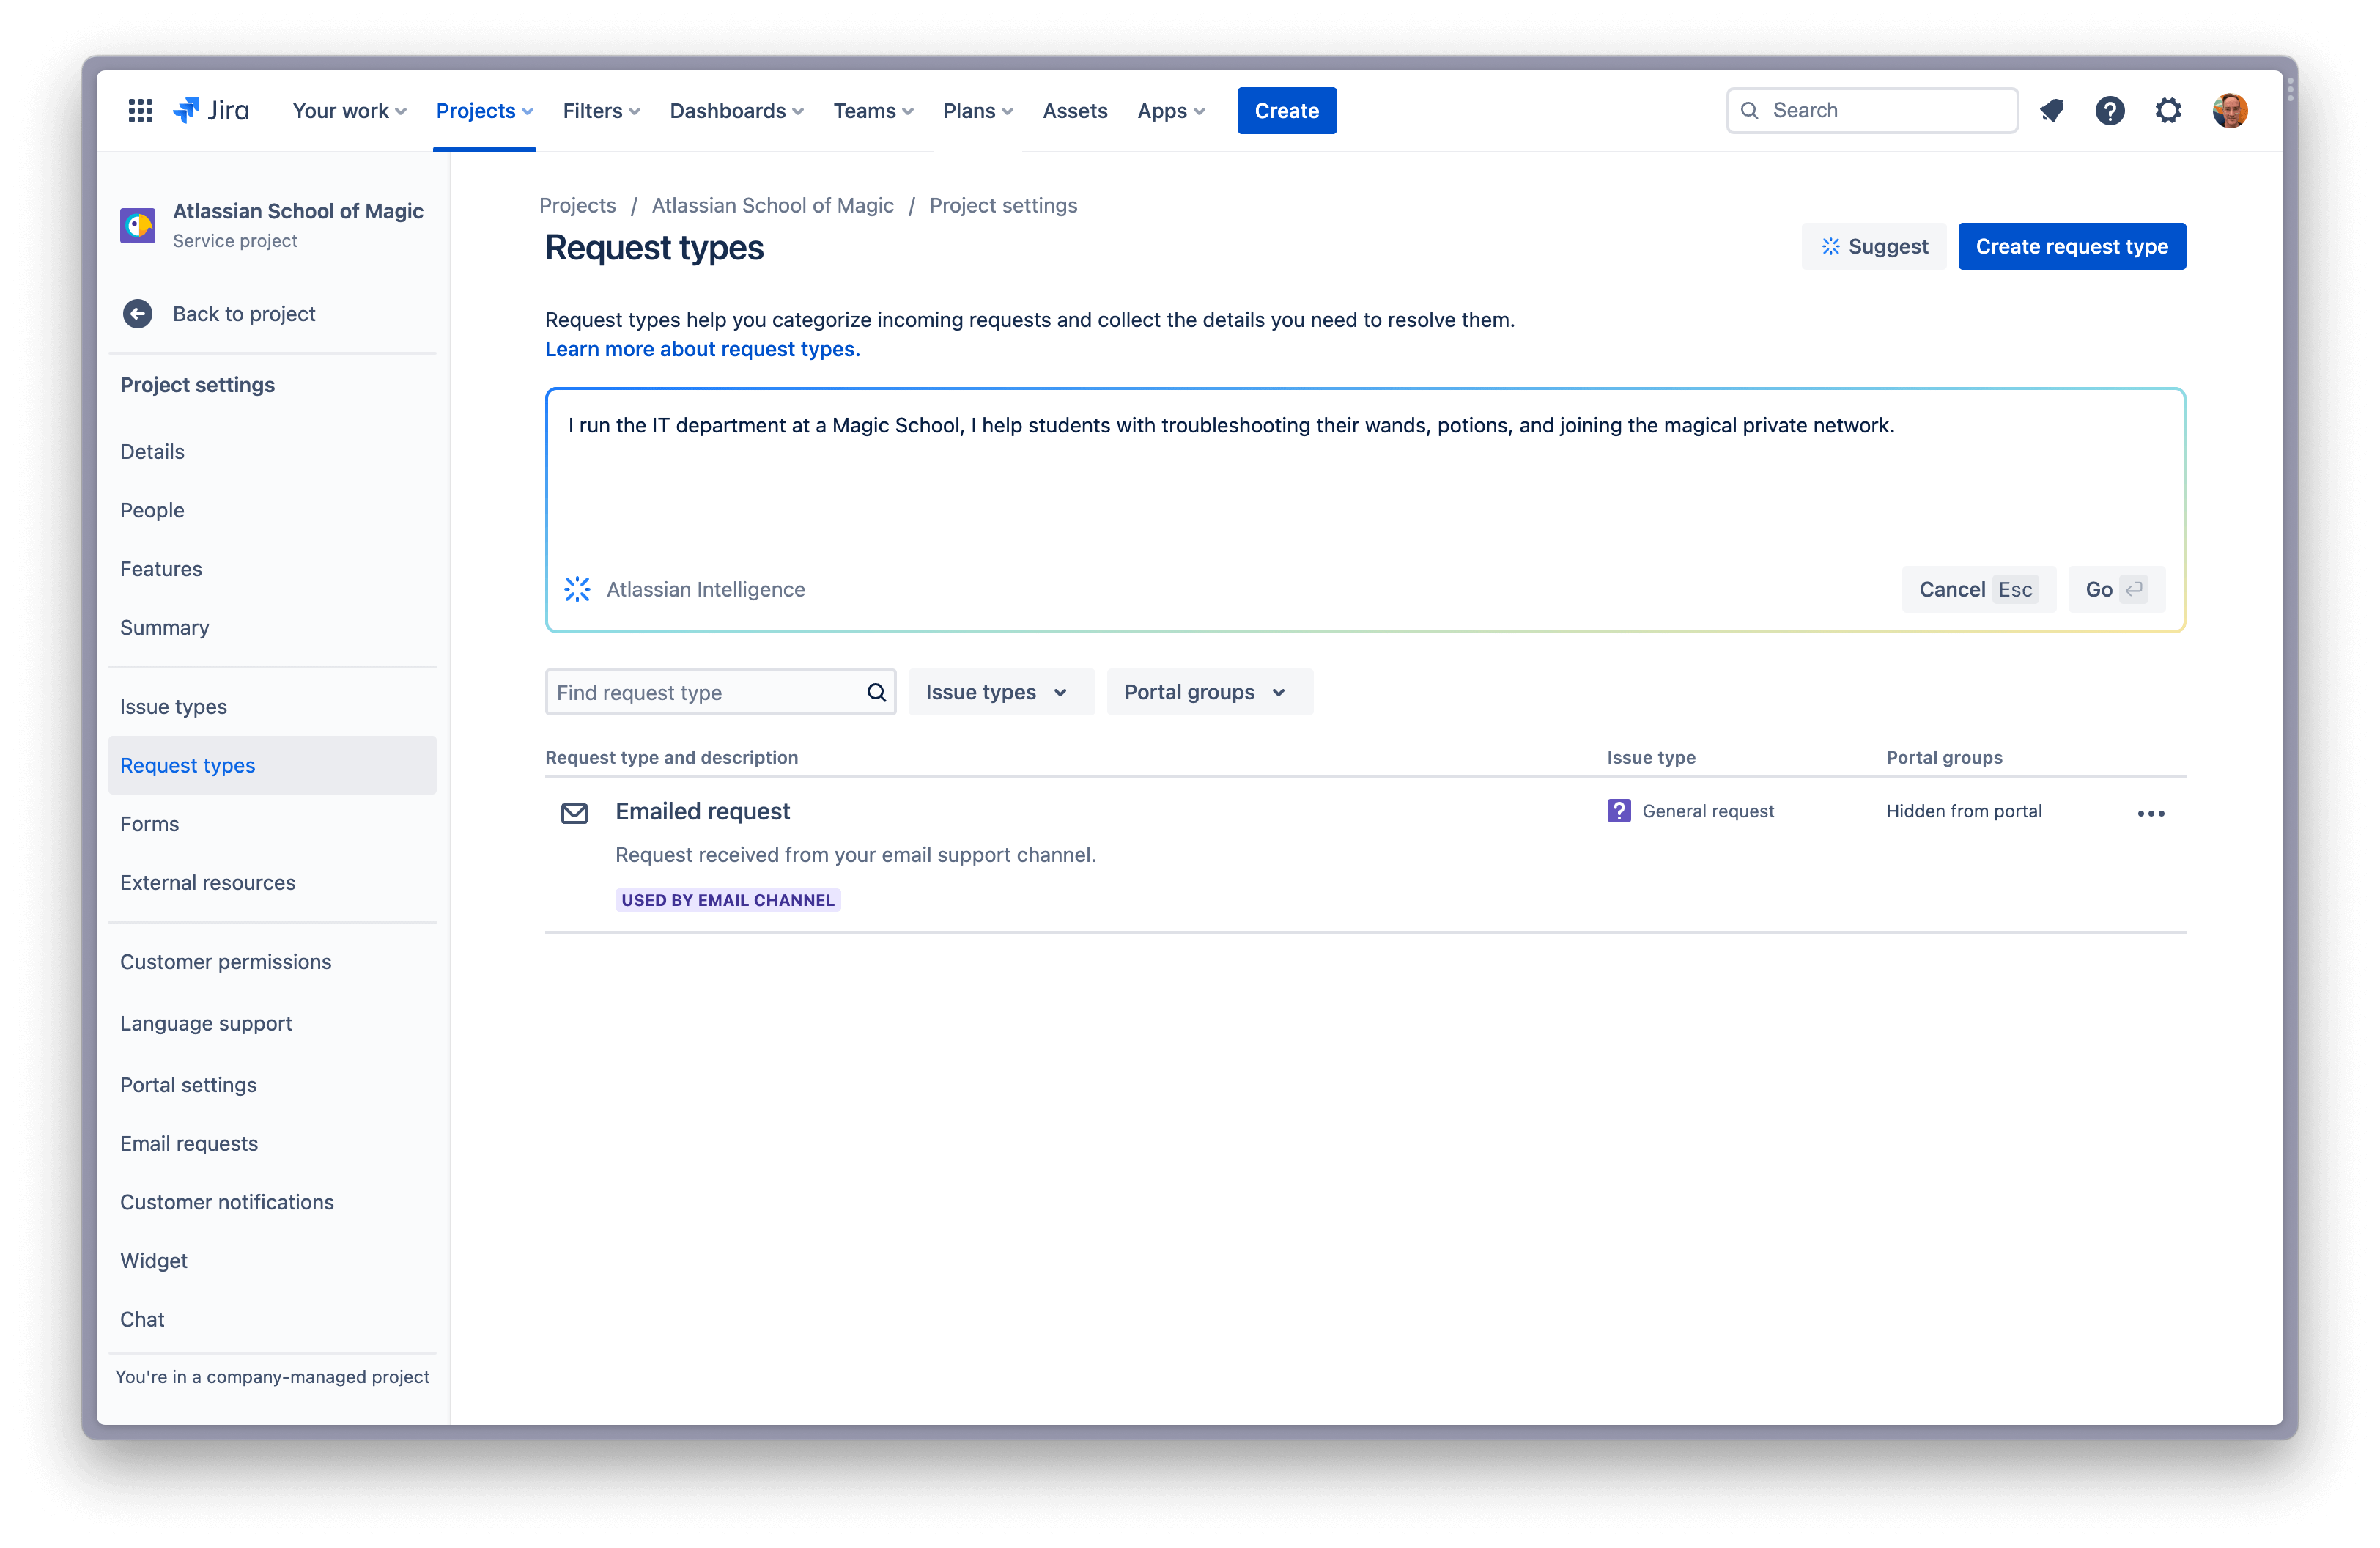 Selecting the "go" button for creating a request type with Atlassian Intelligence